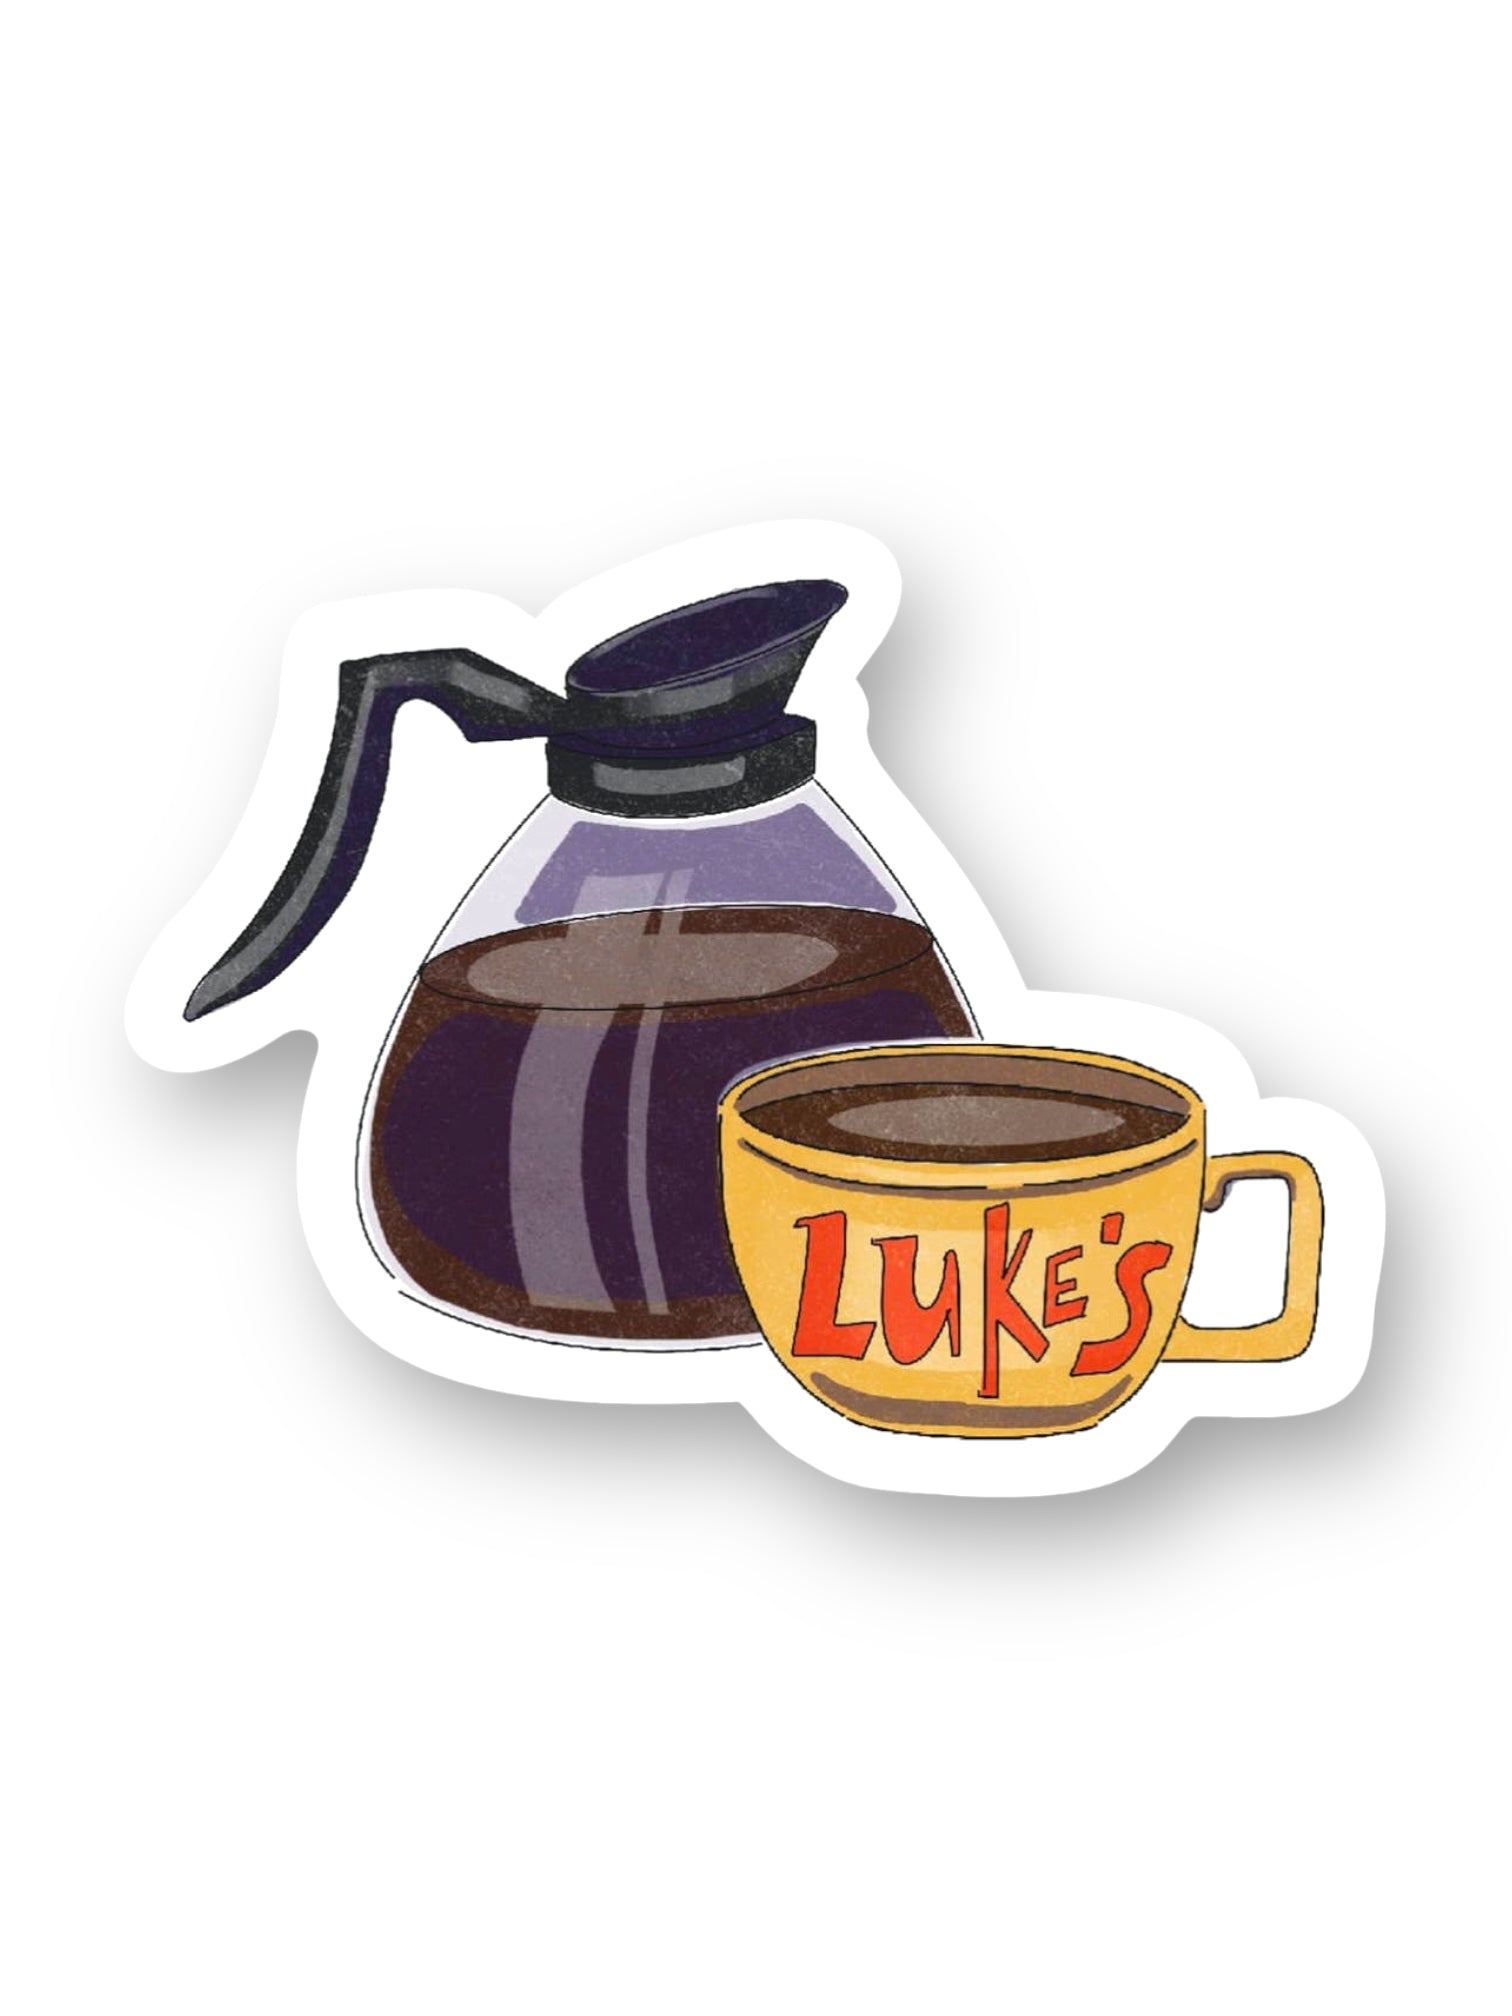 Luke's Diner, Gilmore Girls, Stars Hollow Sticker by Big Moods, Sold by Le Monkey House